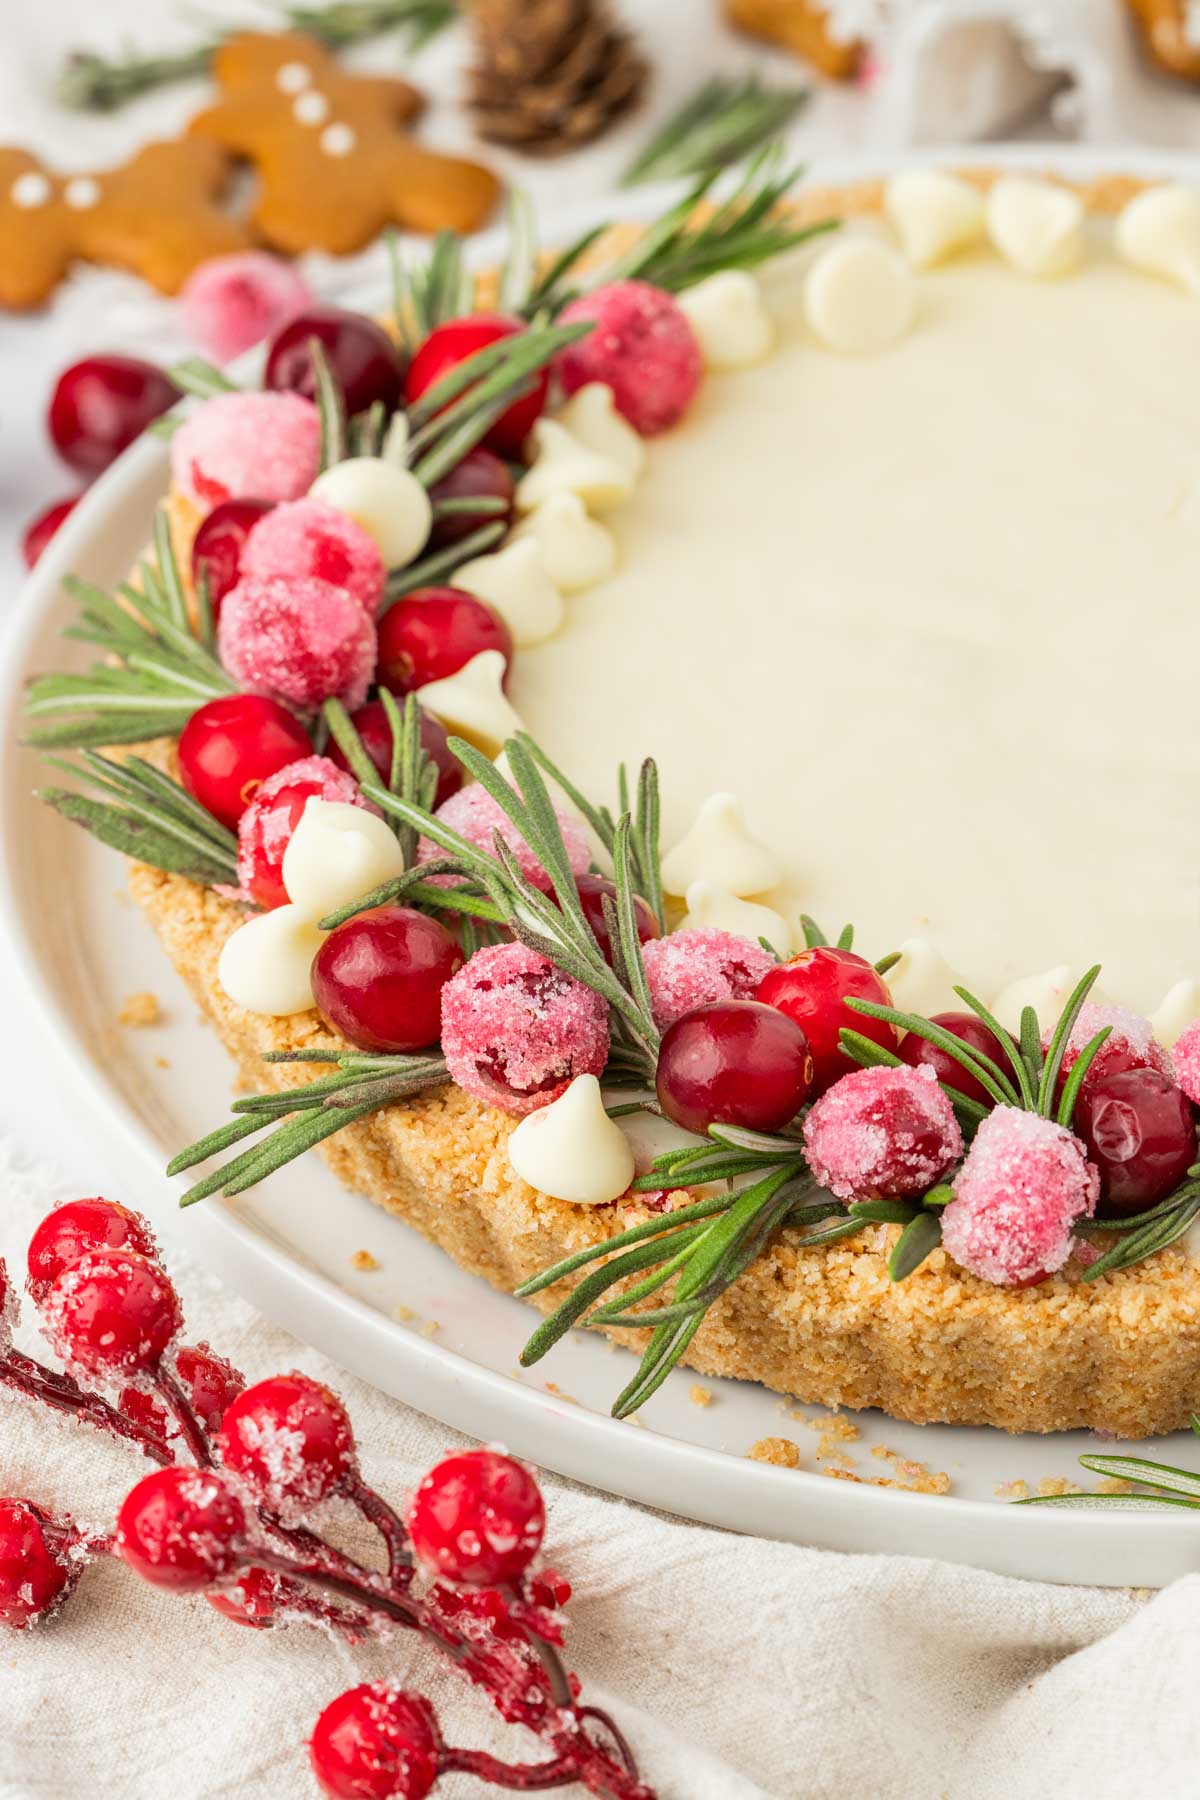 Cranberries and white chocolate chips on top of a Christmas cranberry tart.